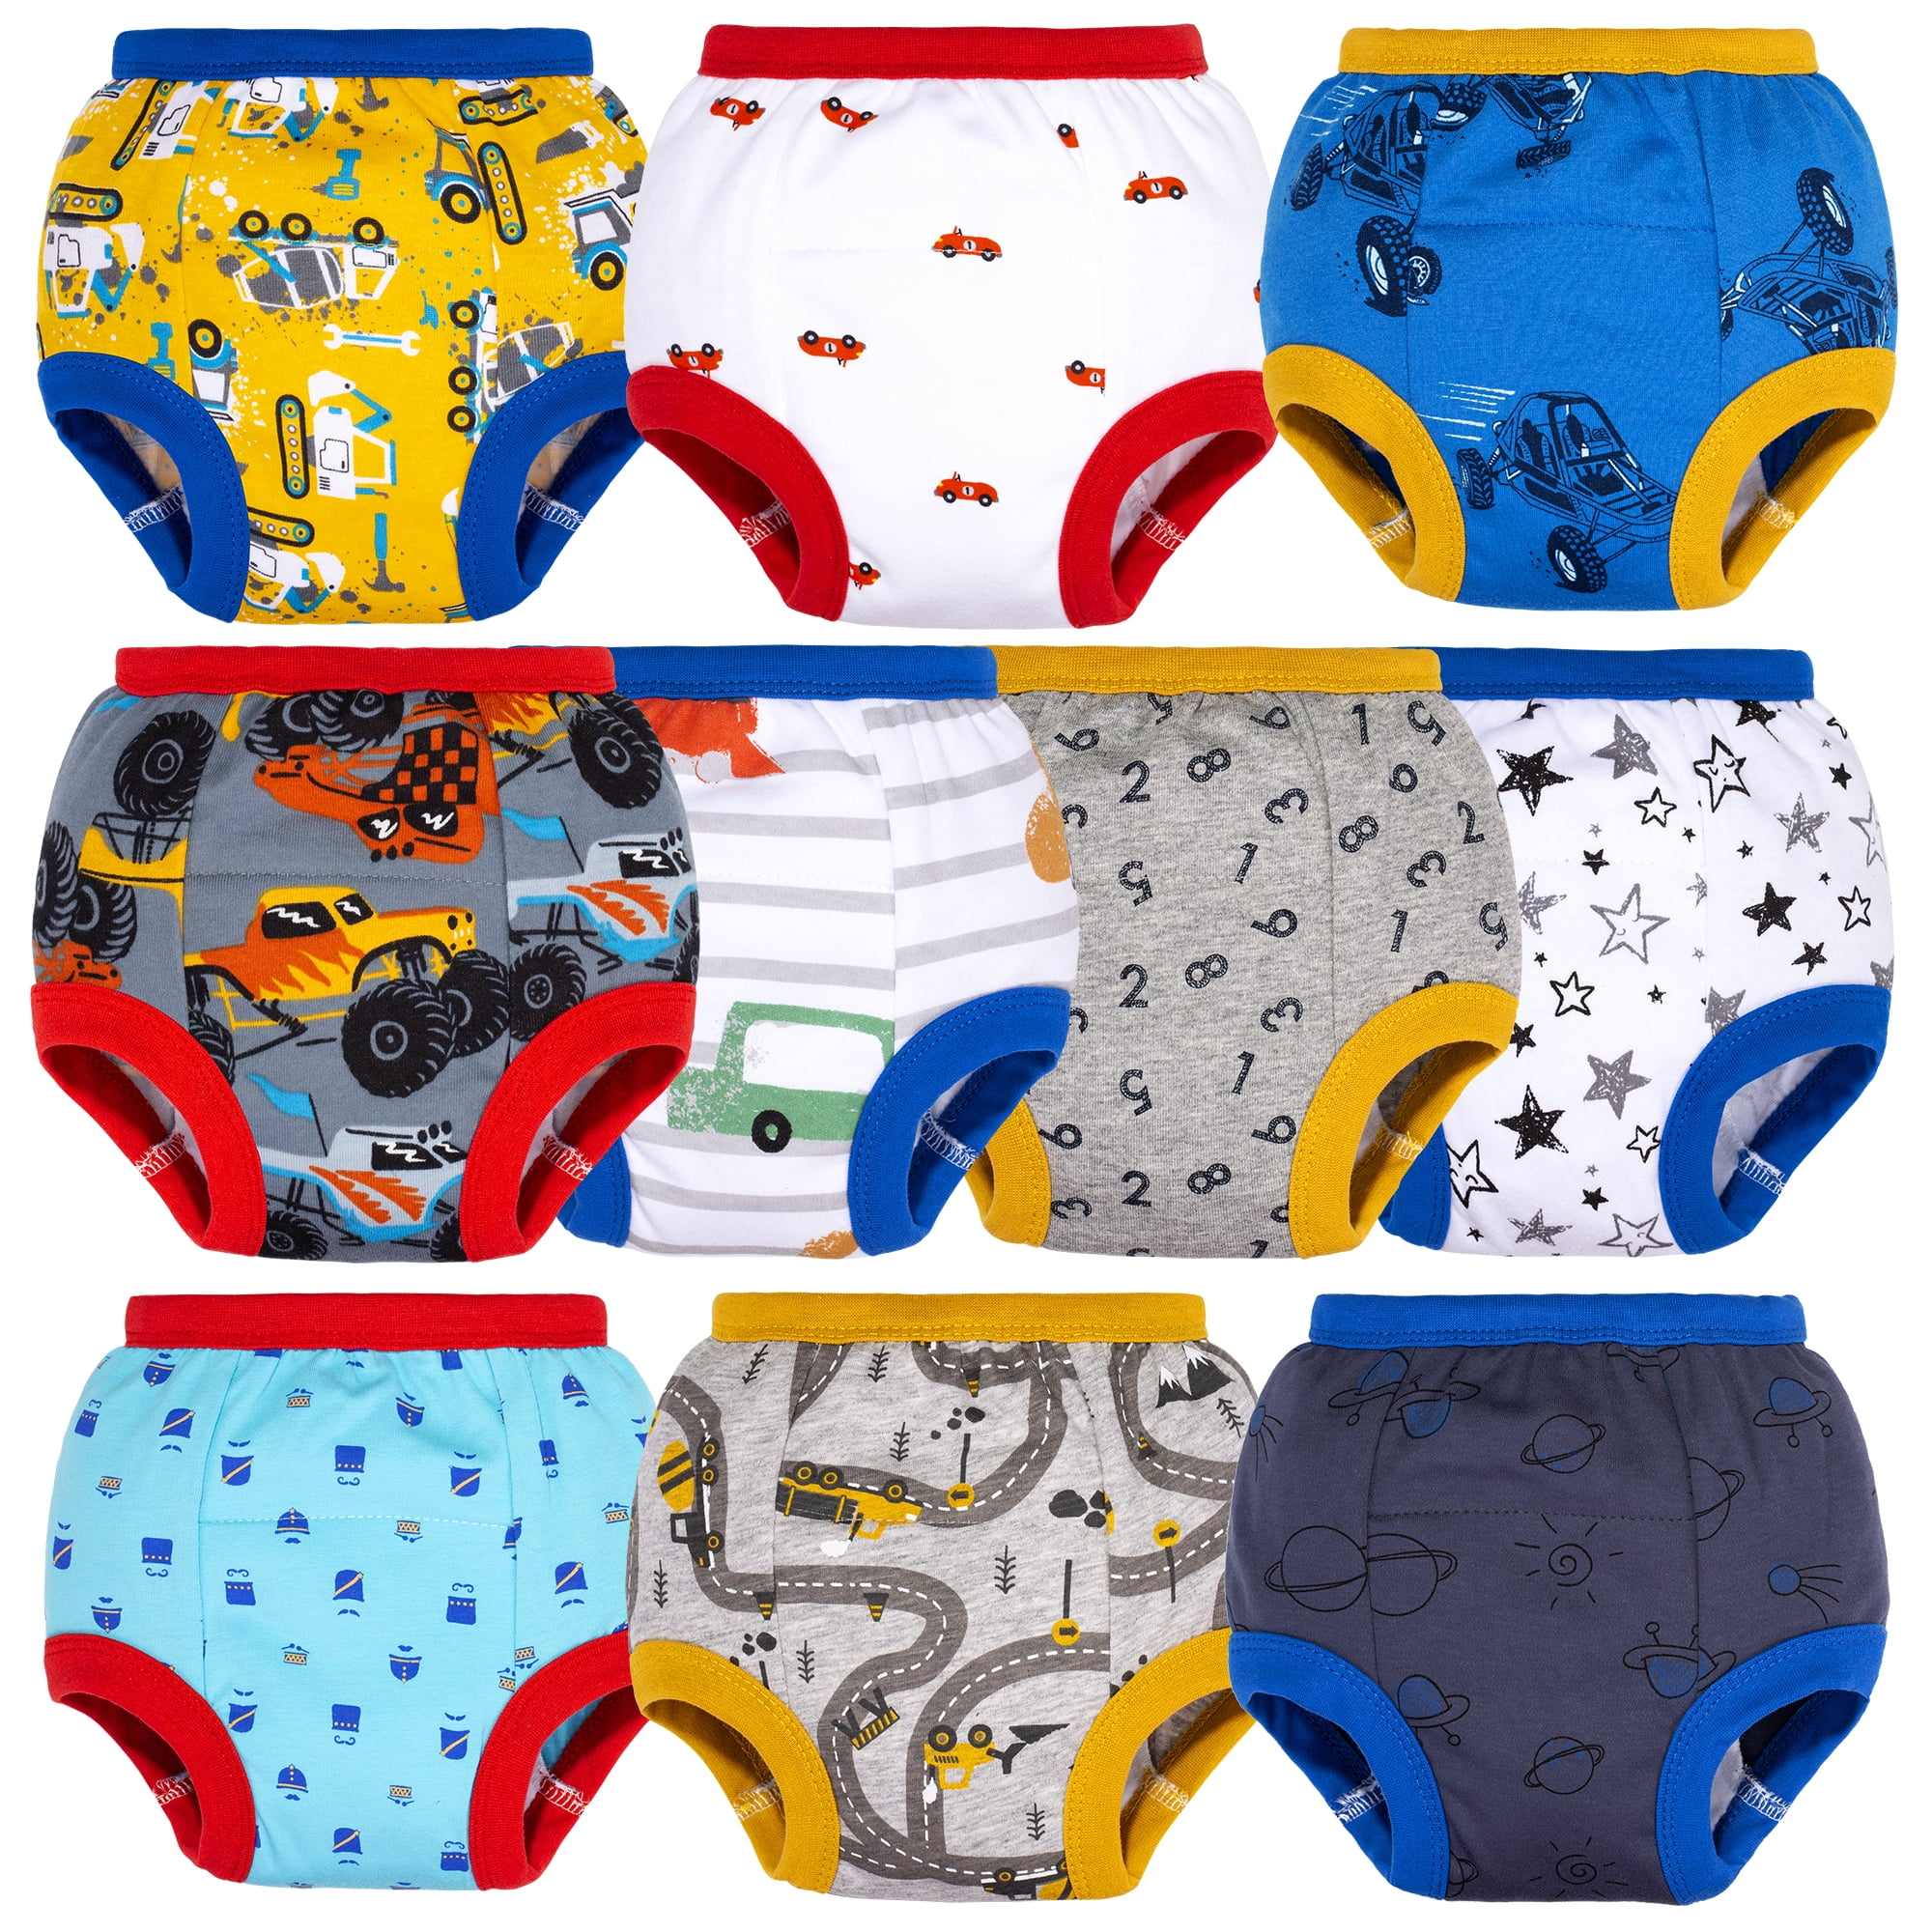 Need to Know Details About Training Pants | Gerber Childrenswear